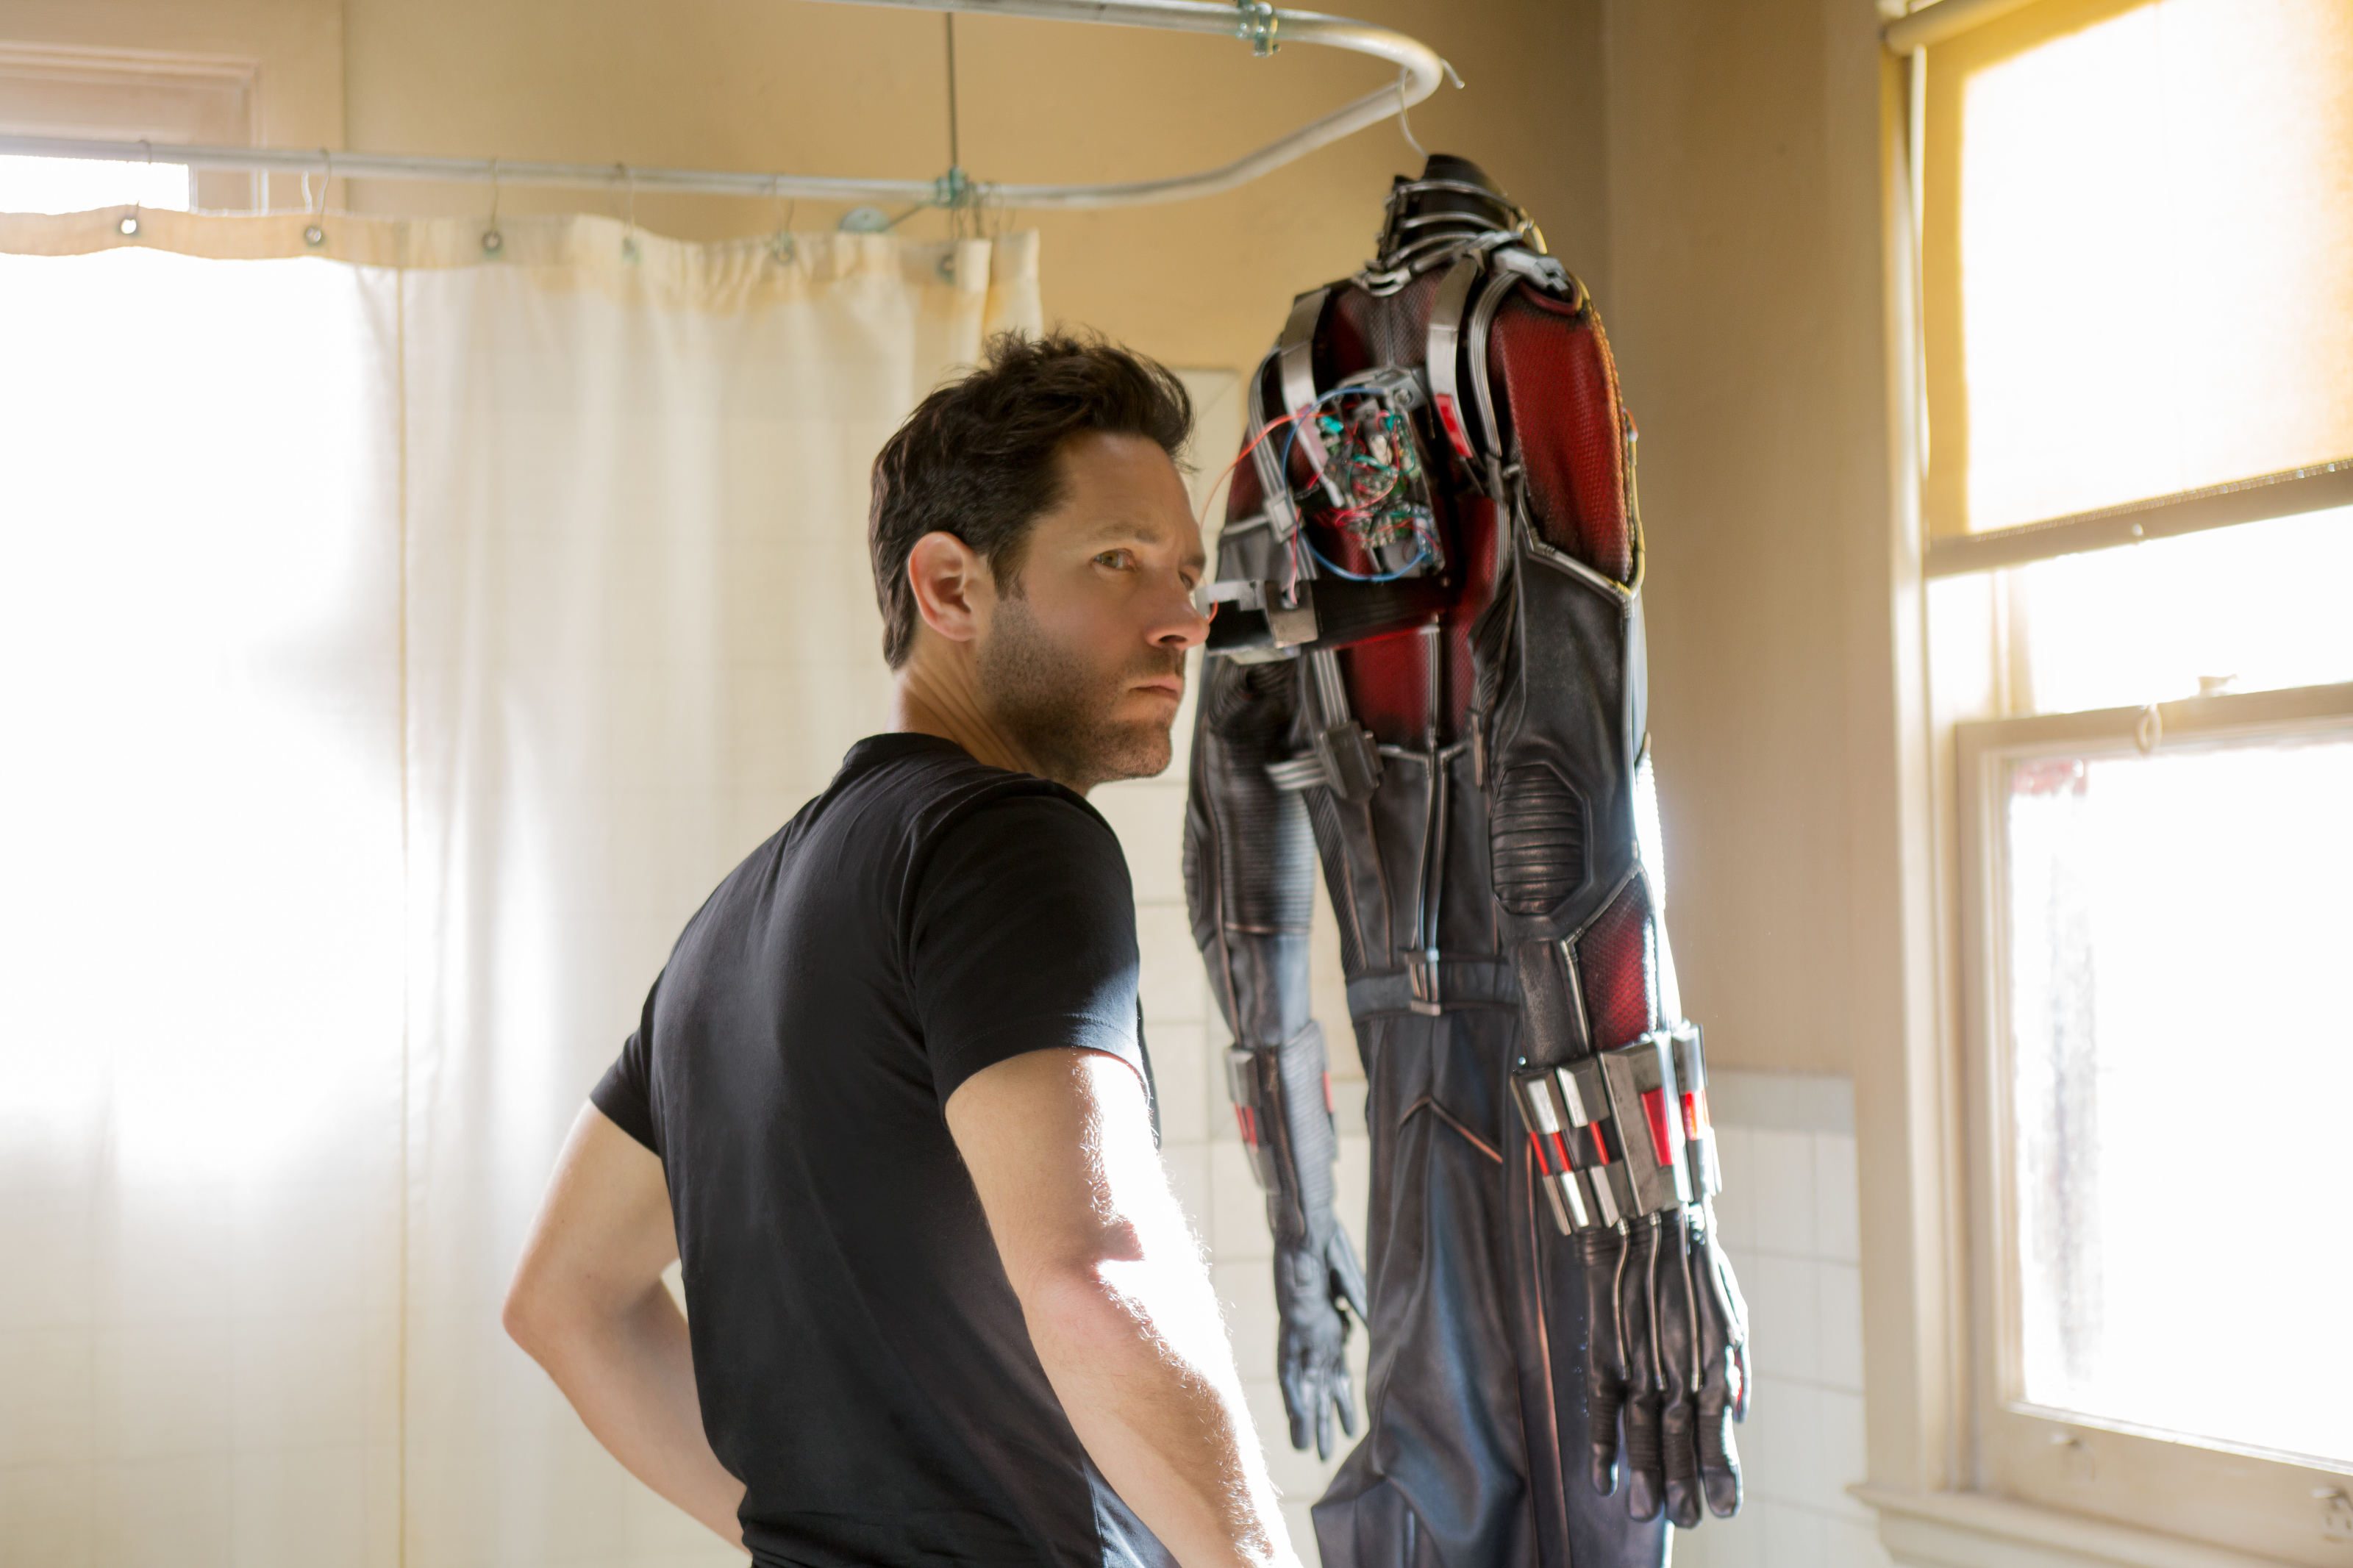 Paul Rudd Likens Joining Marvel In Early Years To Doing 'Dancing